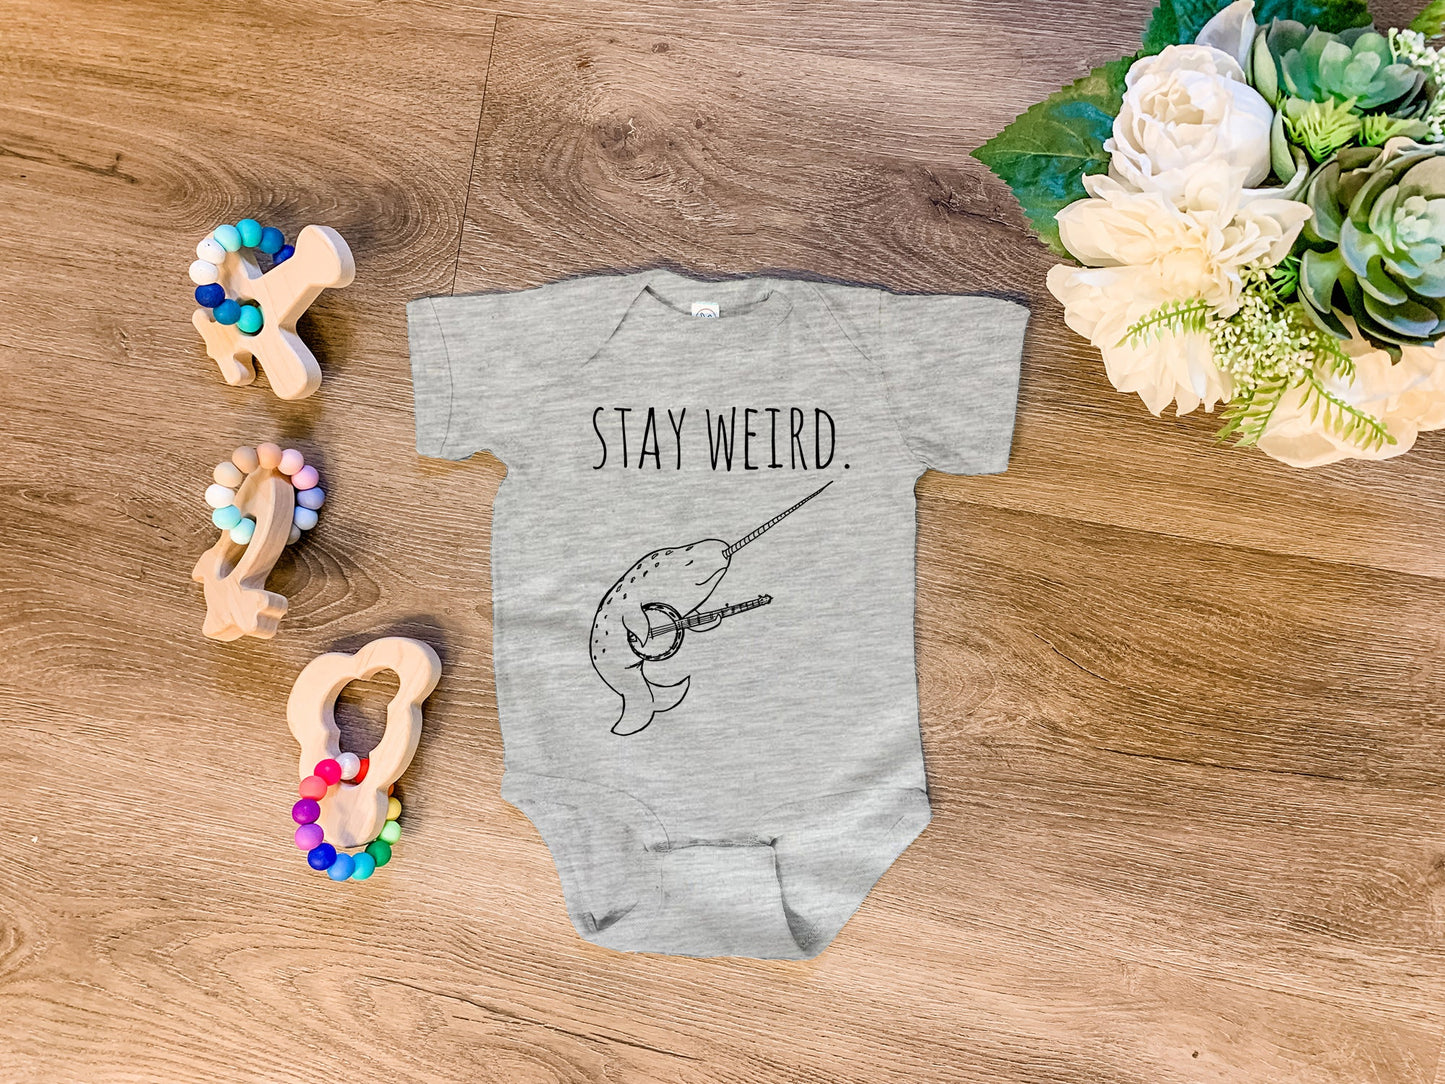 Stay Weird (Narwhal / Banjo) - Onesie - Heather Gray, Chill, or Lavender